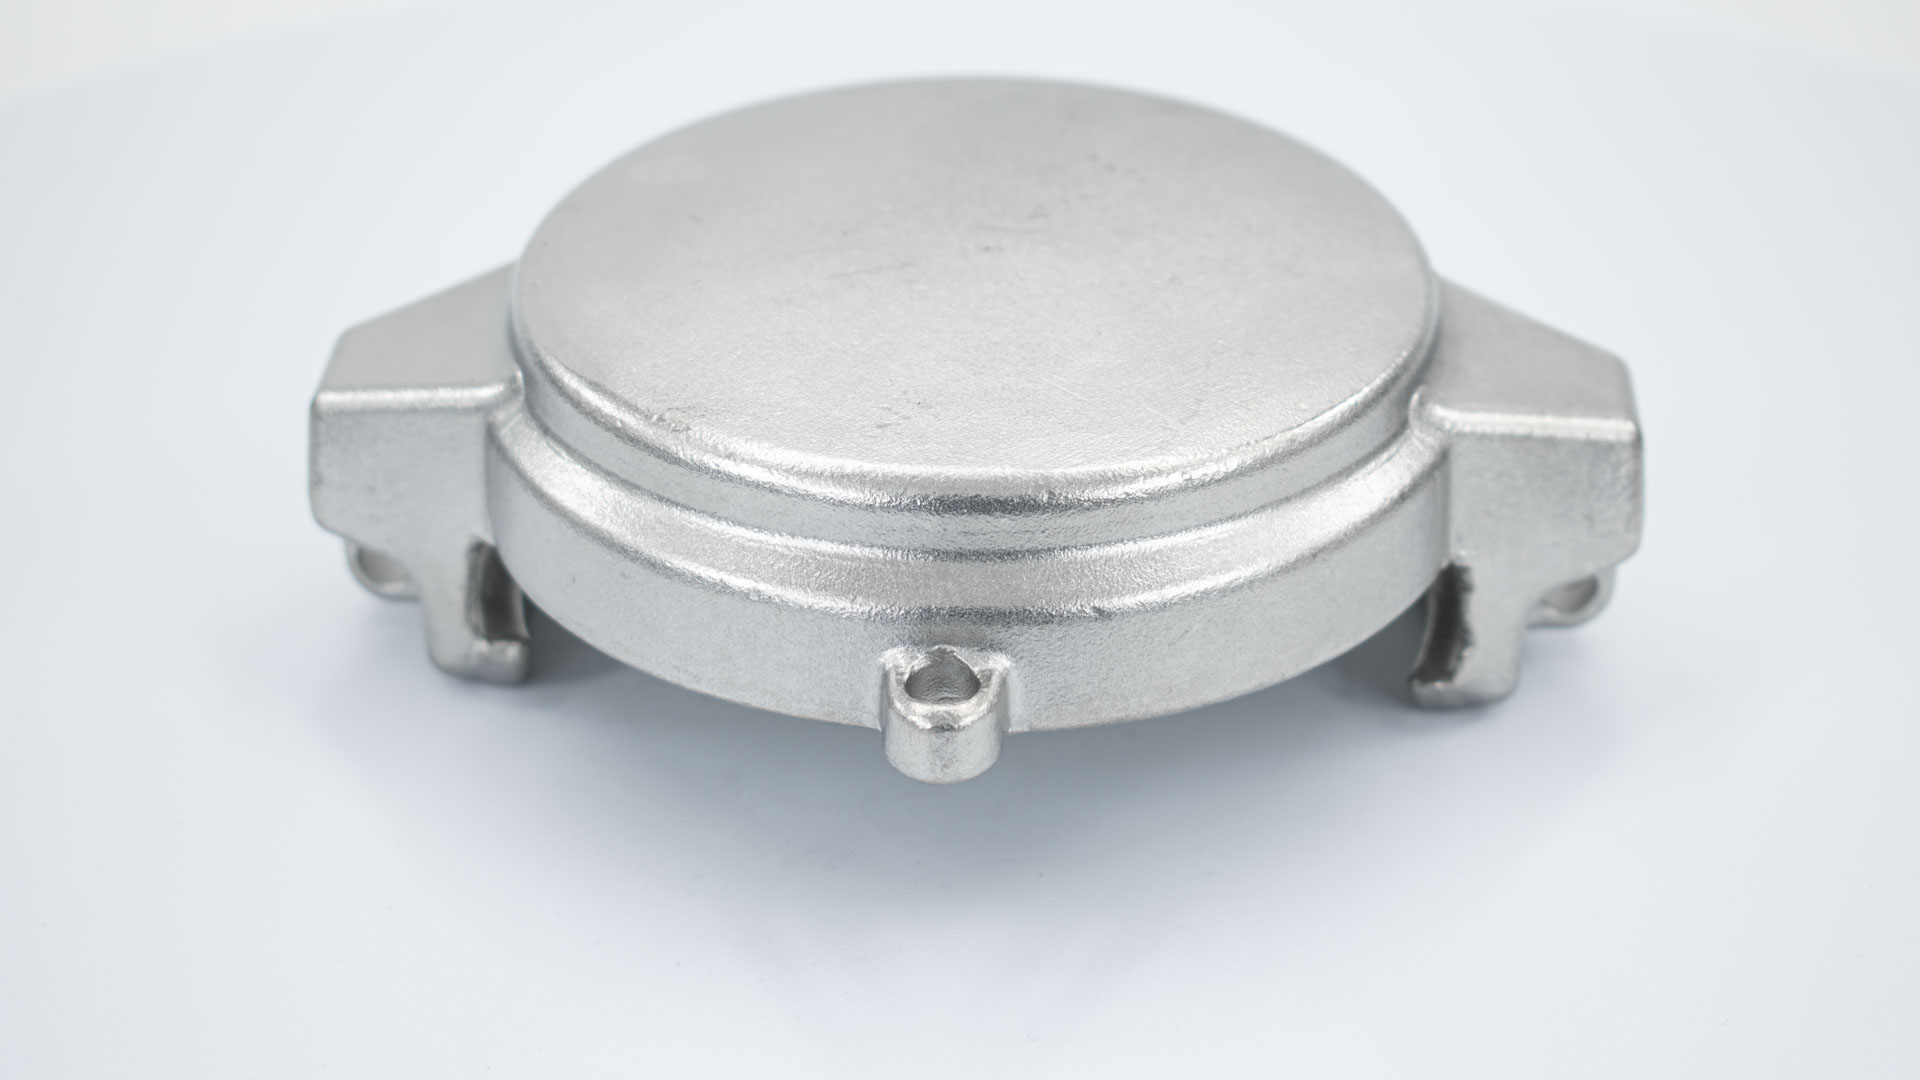 TW cap made of stainless steel according to DIN EN 14420-6 (DIN 28450)